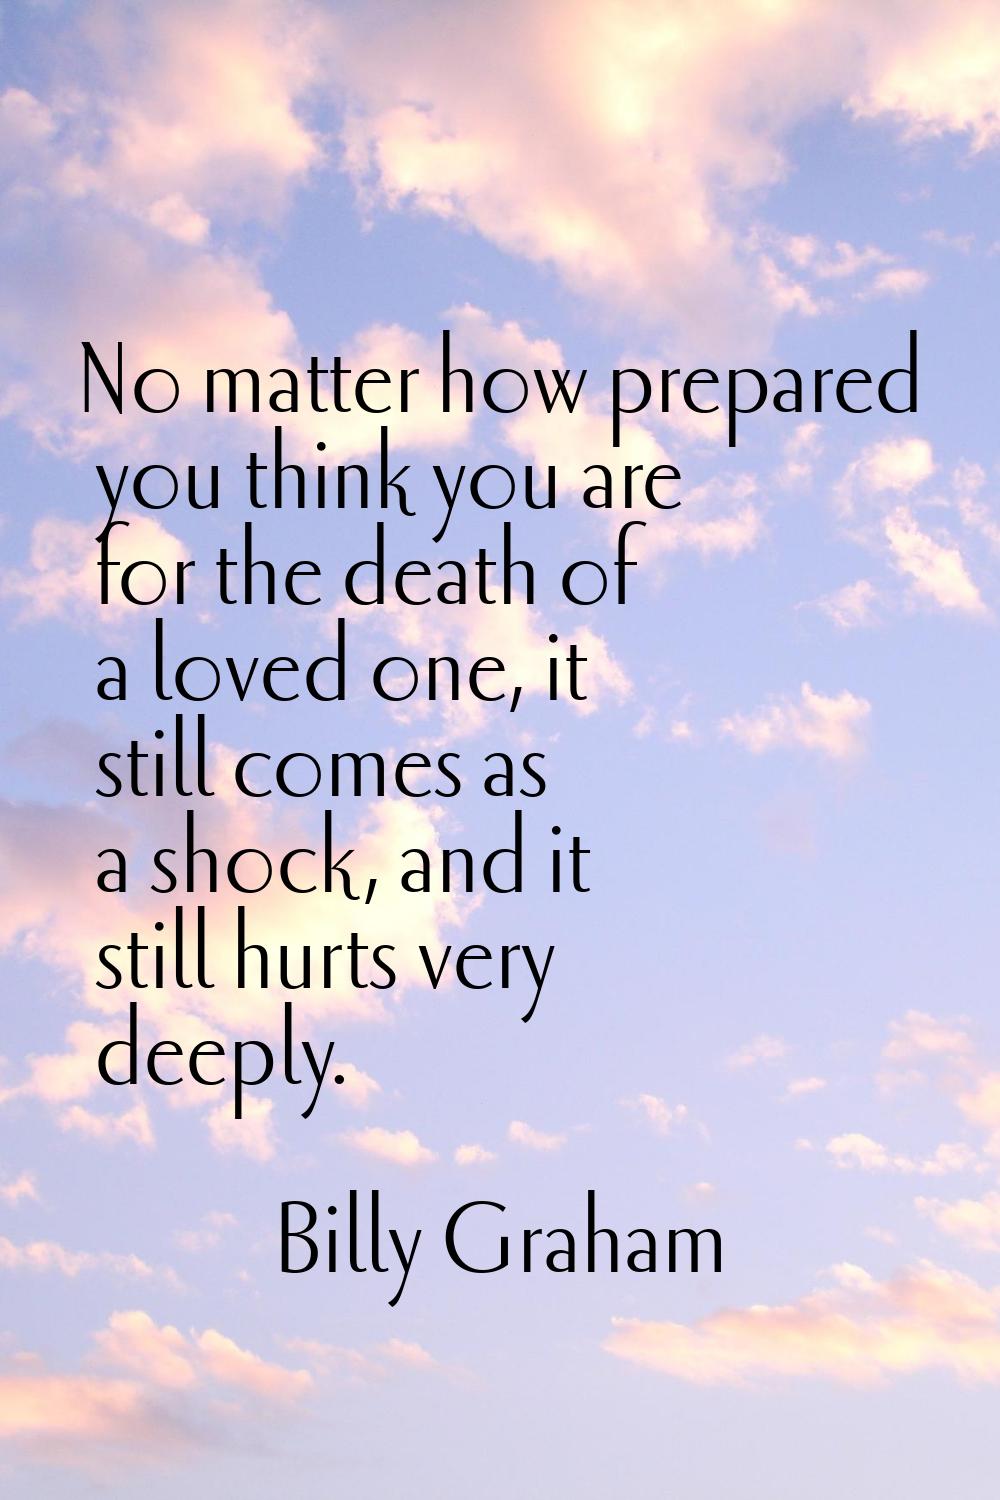 No matter how prepared you think you are for the death of a loved one, it still comes as a shock, a